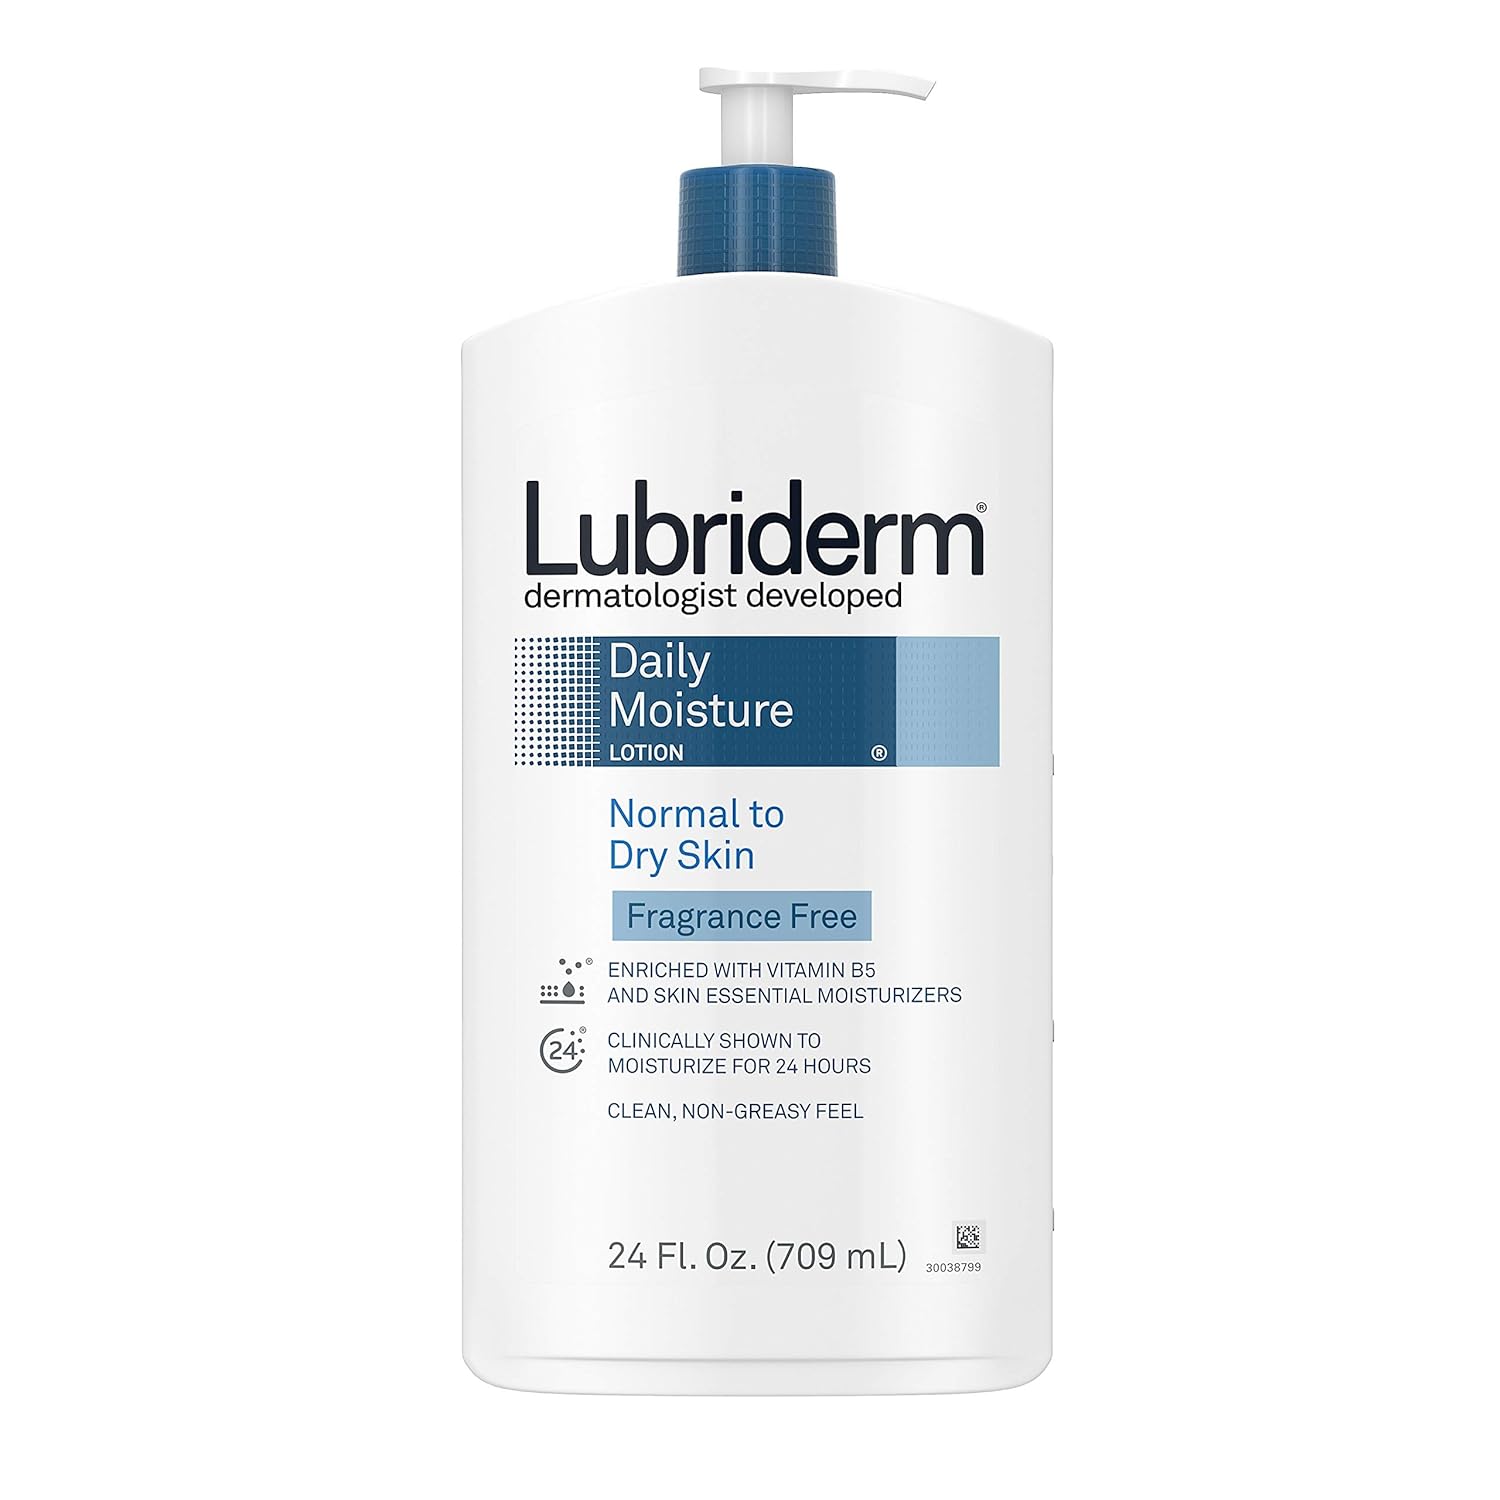 24-Oz Lubriderm Daily Moisture Body Lotion (Fragrance-Free) 1 for $6.99 or 3 for $19.69 ($6.56 each) w/ S&S + Free Shipping w/ Prime or on $35+